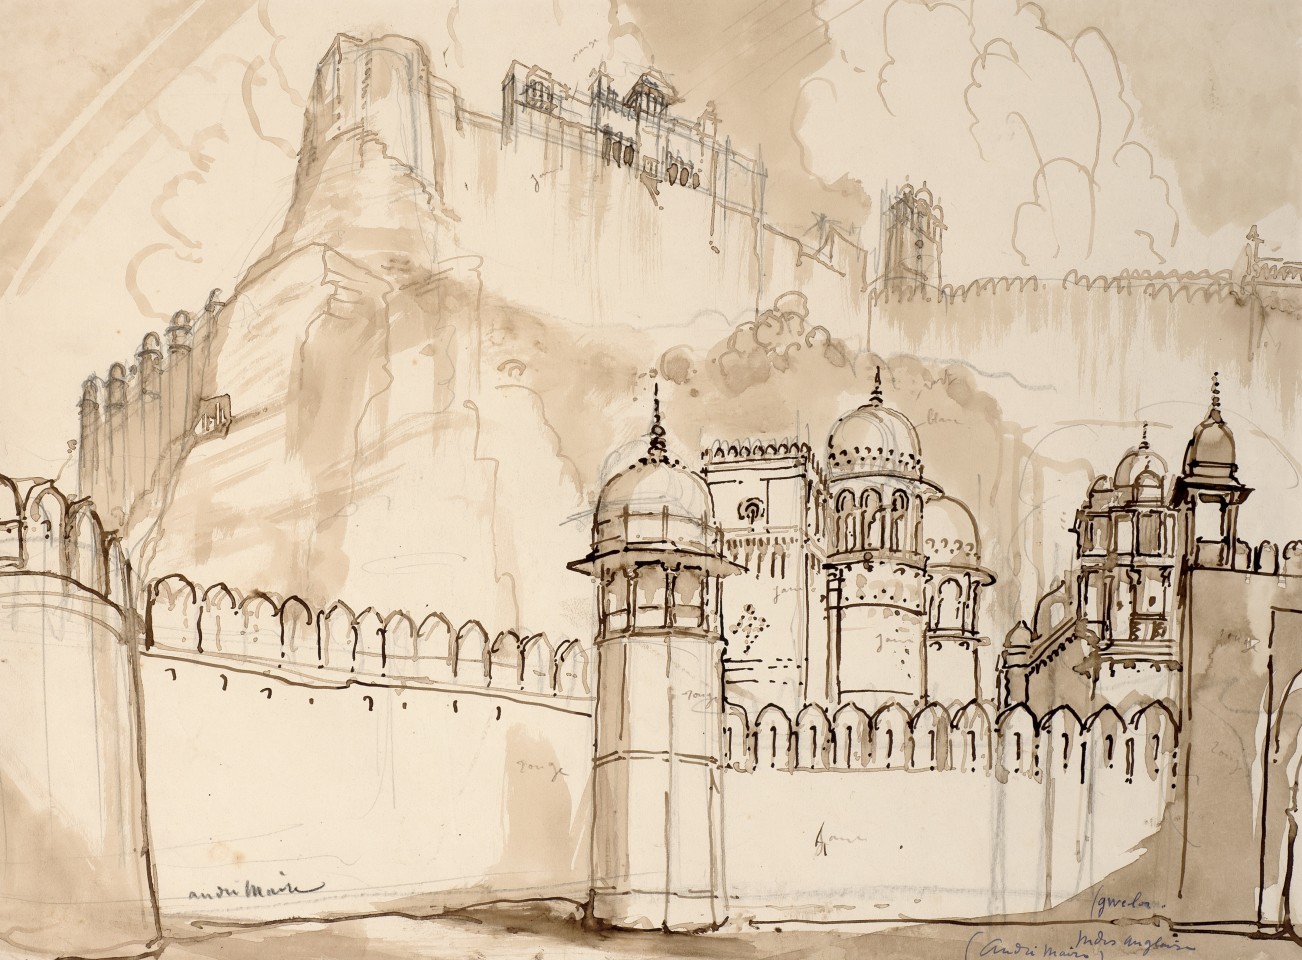 51. André Maire (1898-1984), Gwalior, 1938